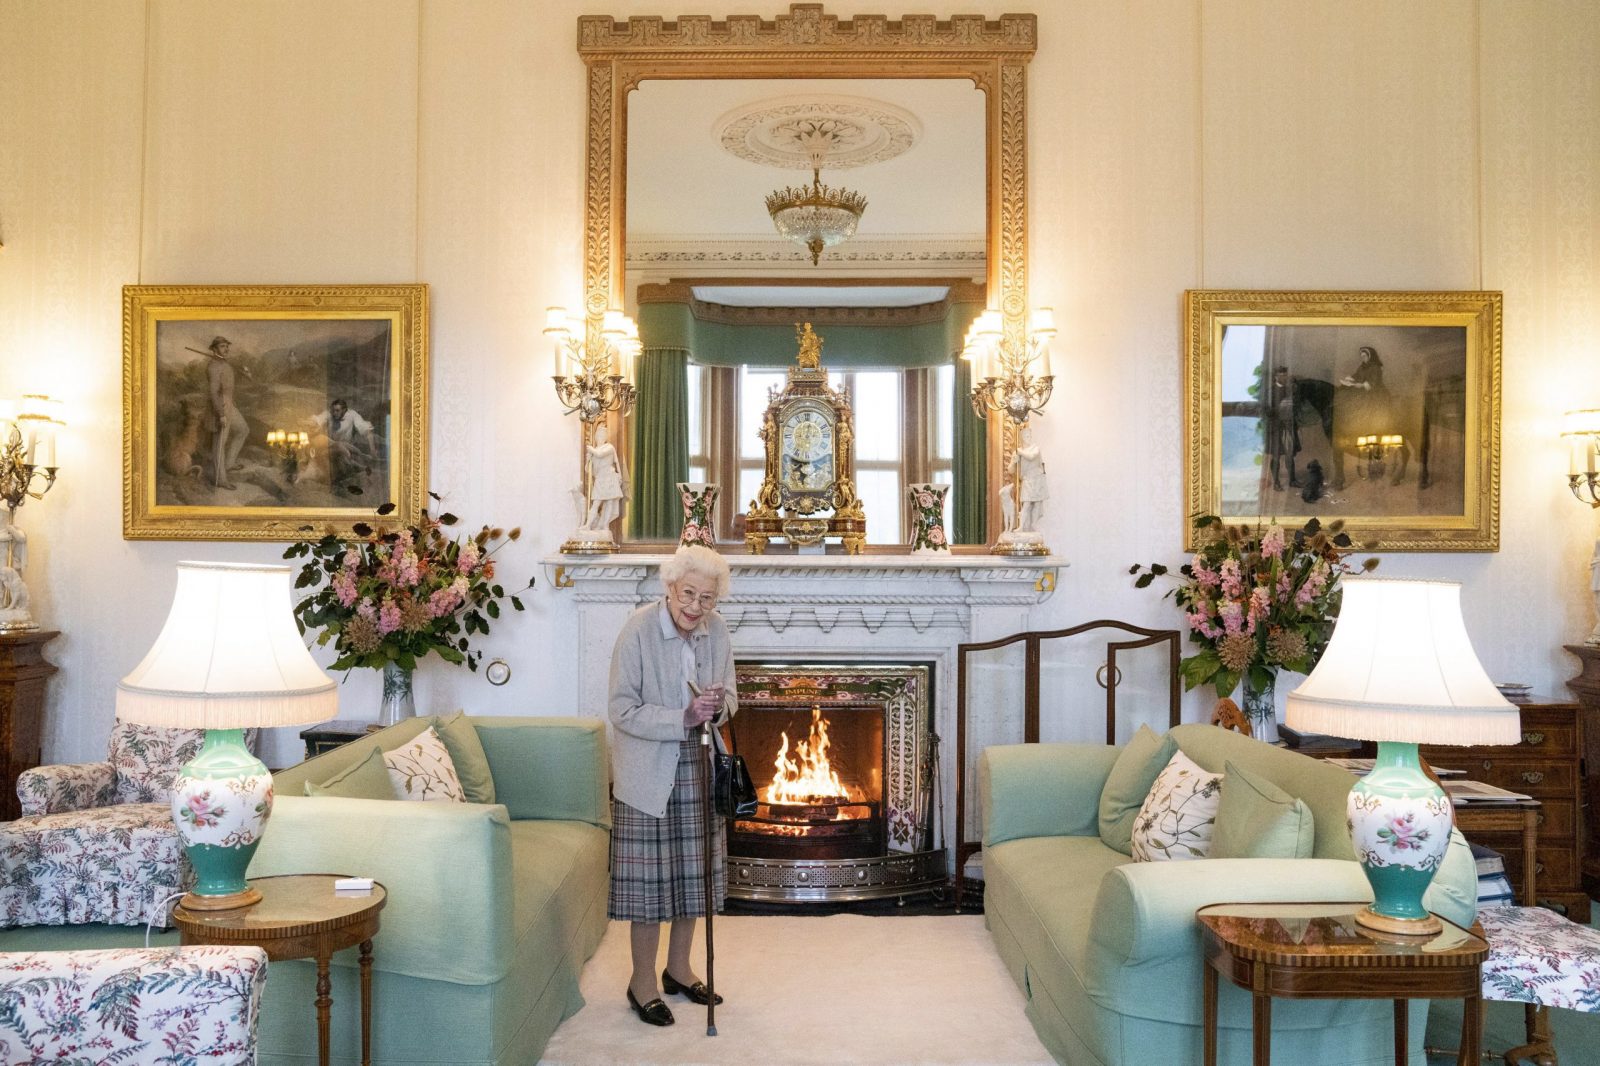 epa10164071 Queen Elizabeth II waits in the Drawing Room before receiving Liz Truss for an audience at Balmoral, Scotland, Britain 06 September 2022. Truss was in Balmoral for an audience with Queen Elizabeth II where she was invited to become Prime Minister and form a new government.  EPA/Andrew Milligan / POOL